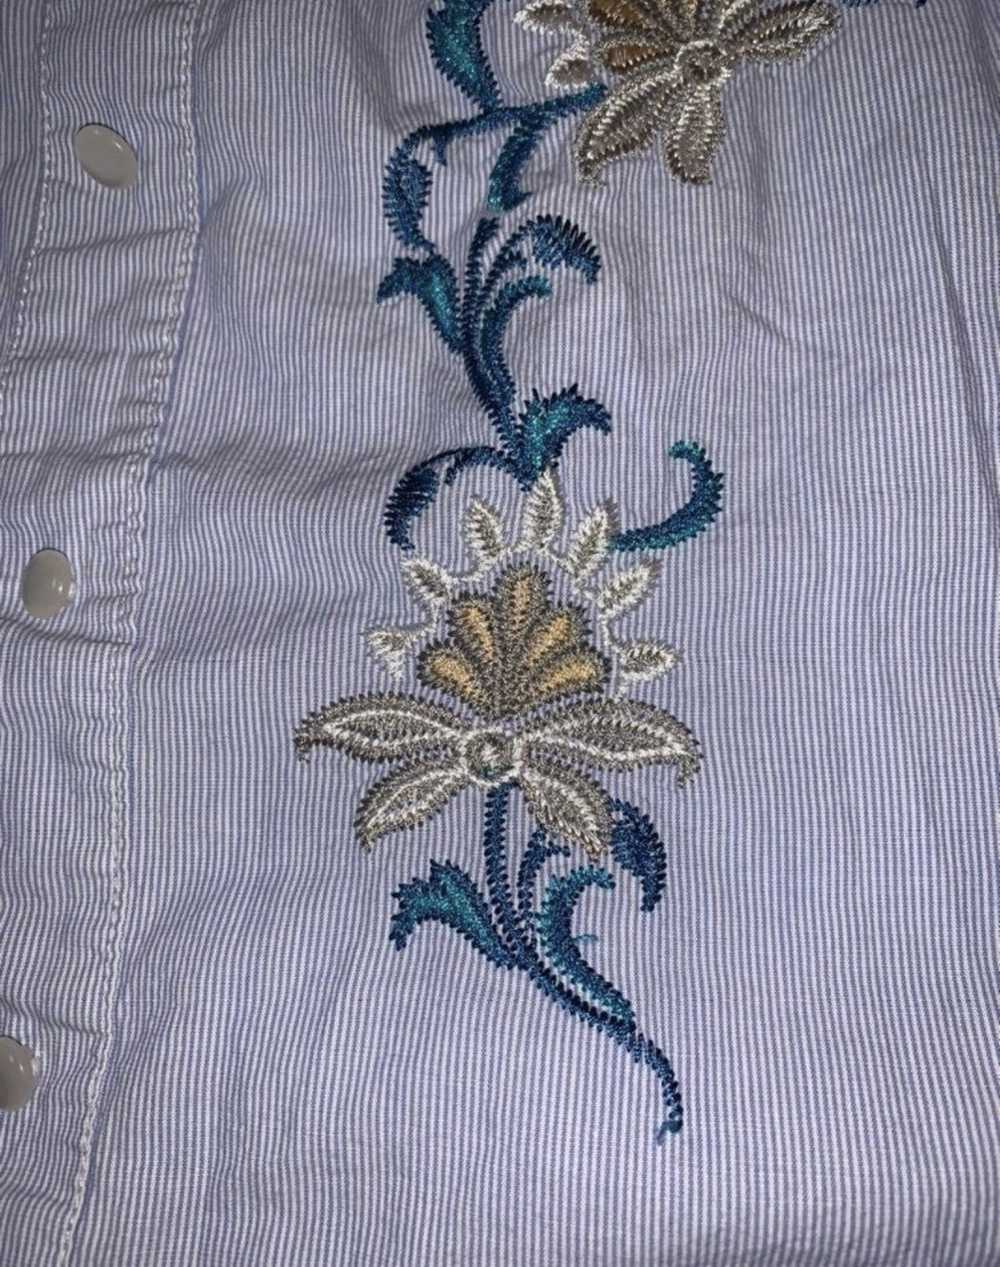 Other Flower and Feather peasant top L - image 5